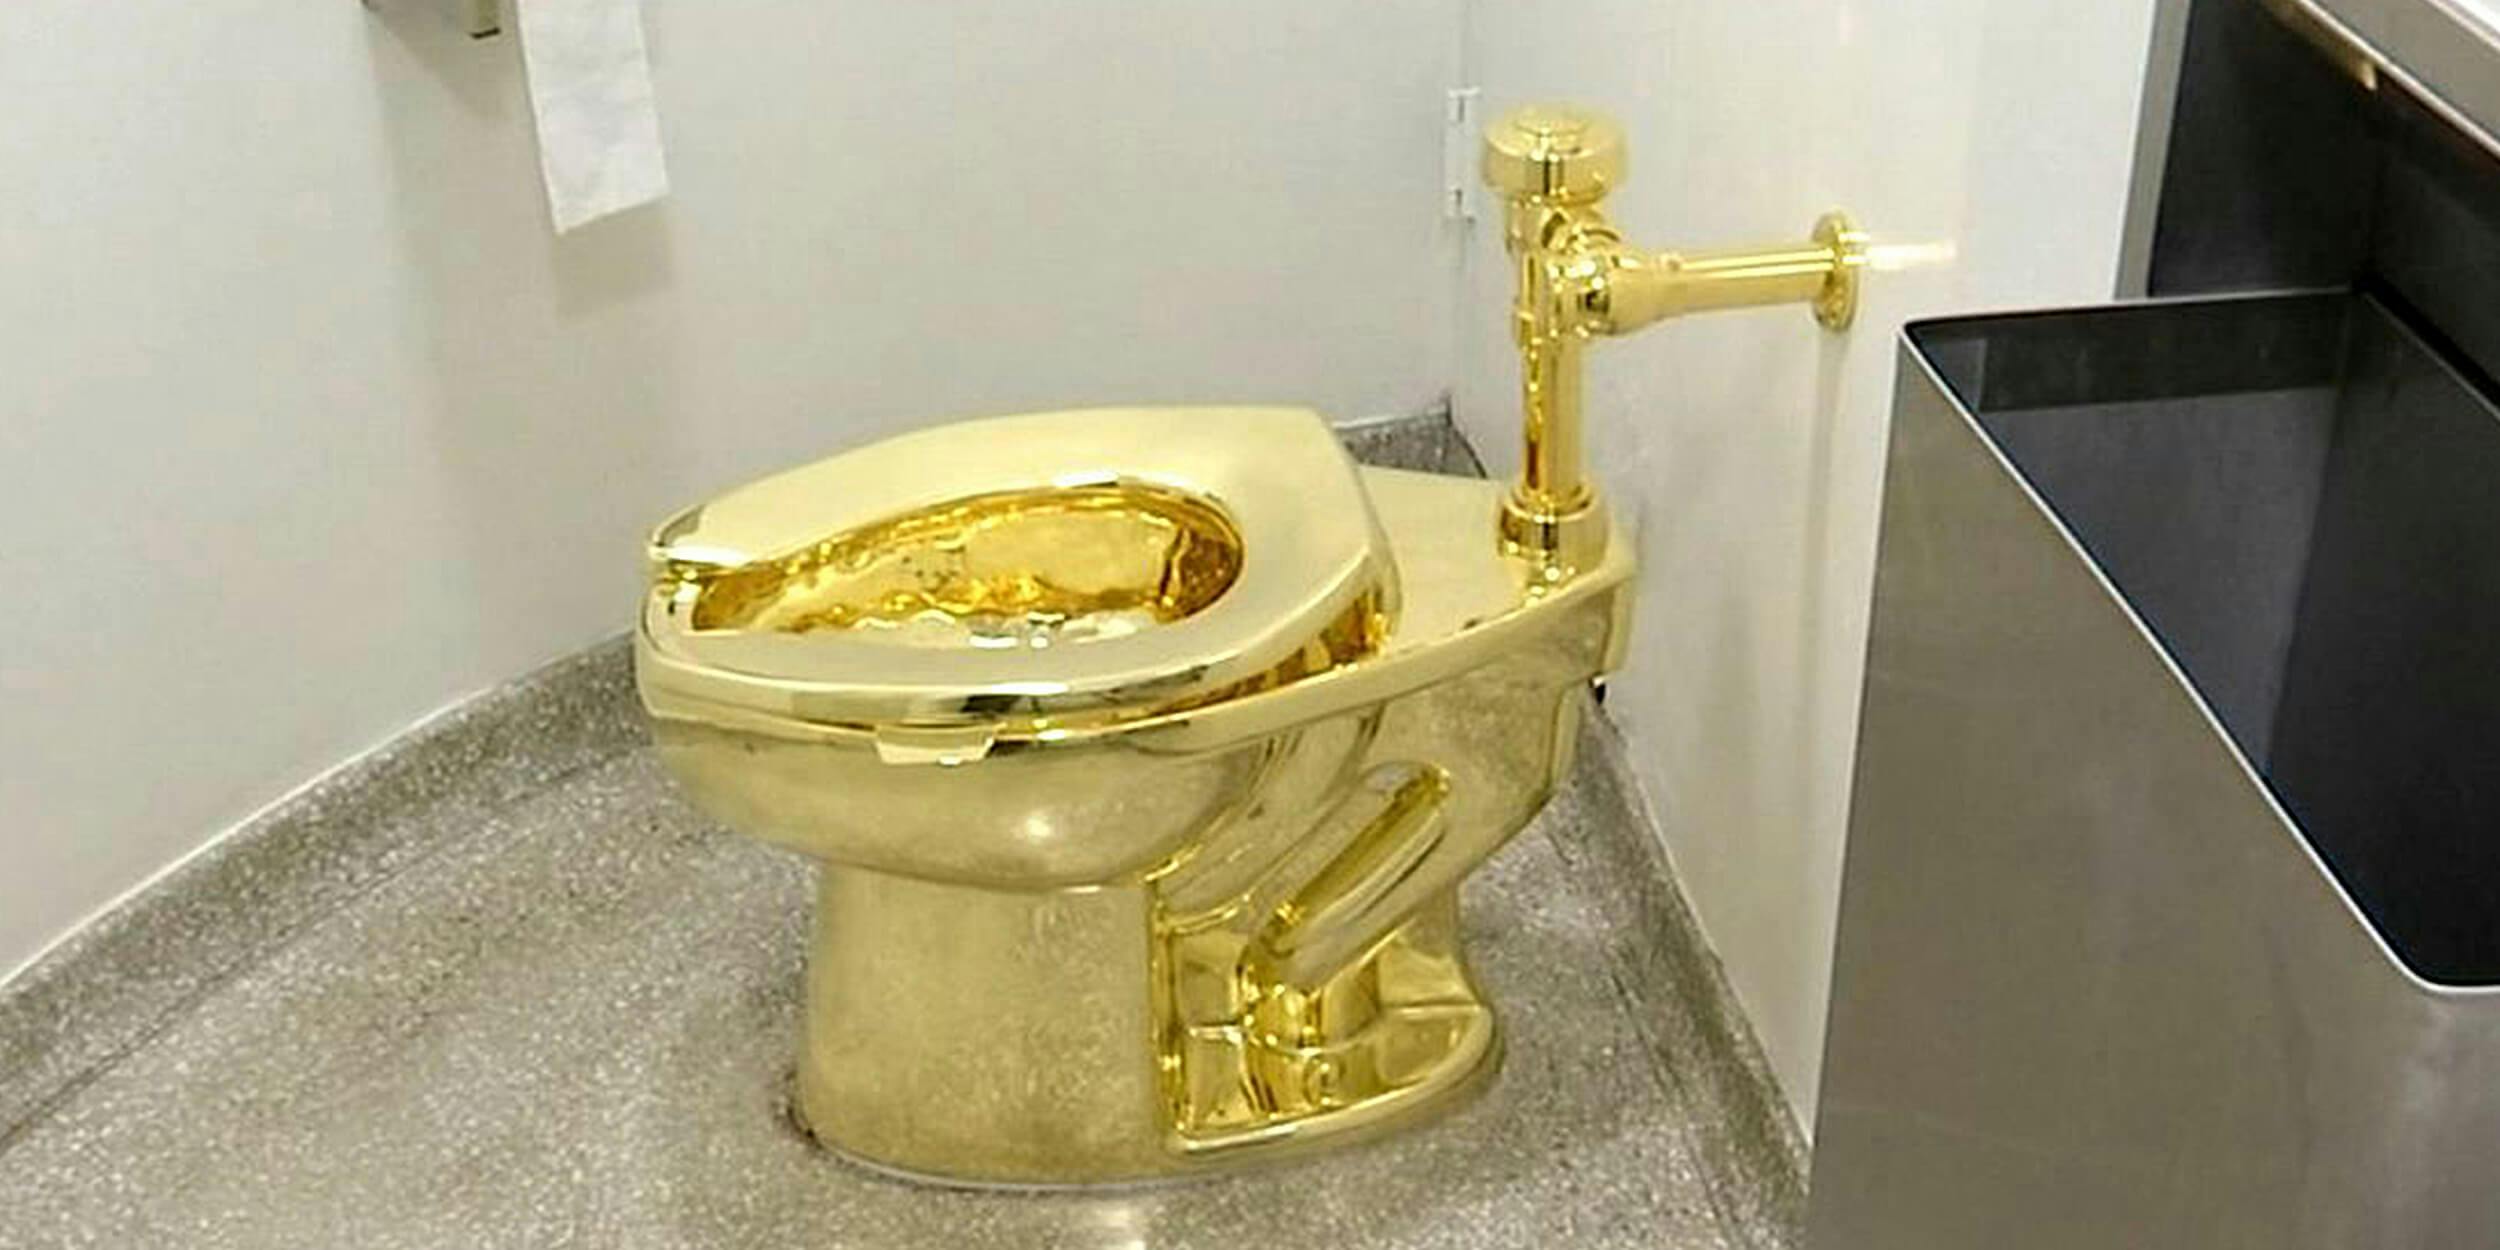 18-karat toilet, titled 'America,' by Maurizio Cattelan in the restroom of the Solomon R. Guggenheim Museum in New York